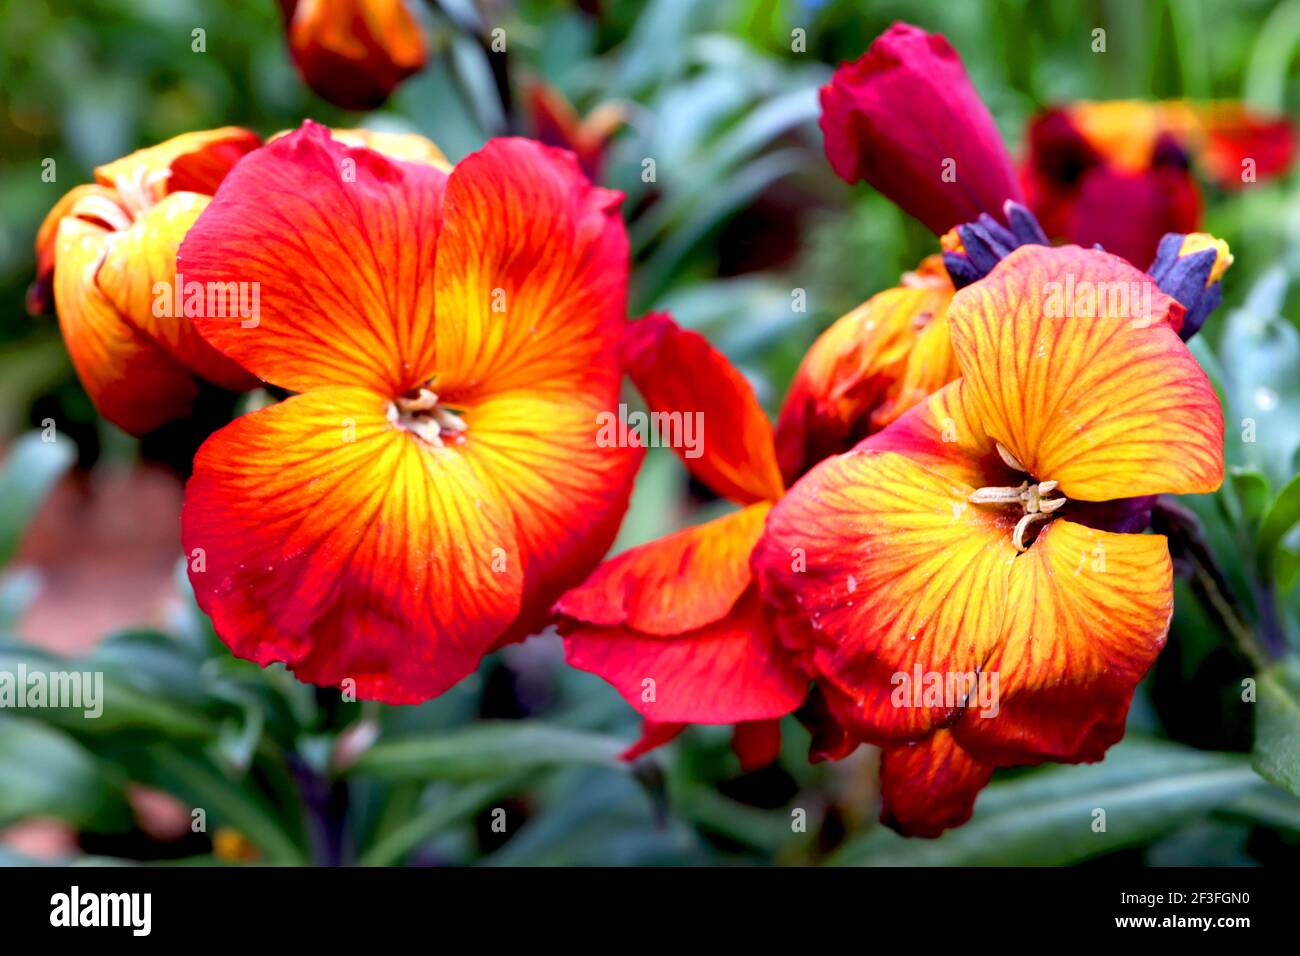 Erysimum ‘Scarlet bedder’ with mosaic virus Wallflower Scarlet bedder – orange and yellow flowers streaked with red,  March, England, UK Stock Photo